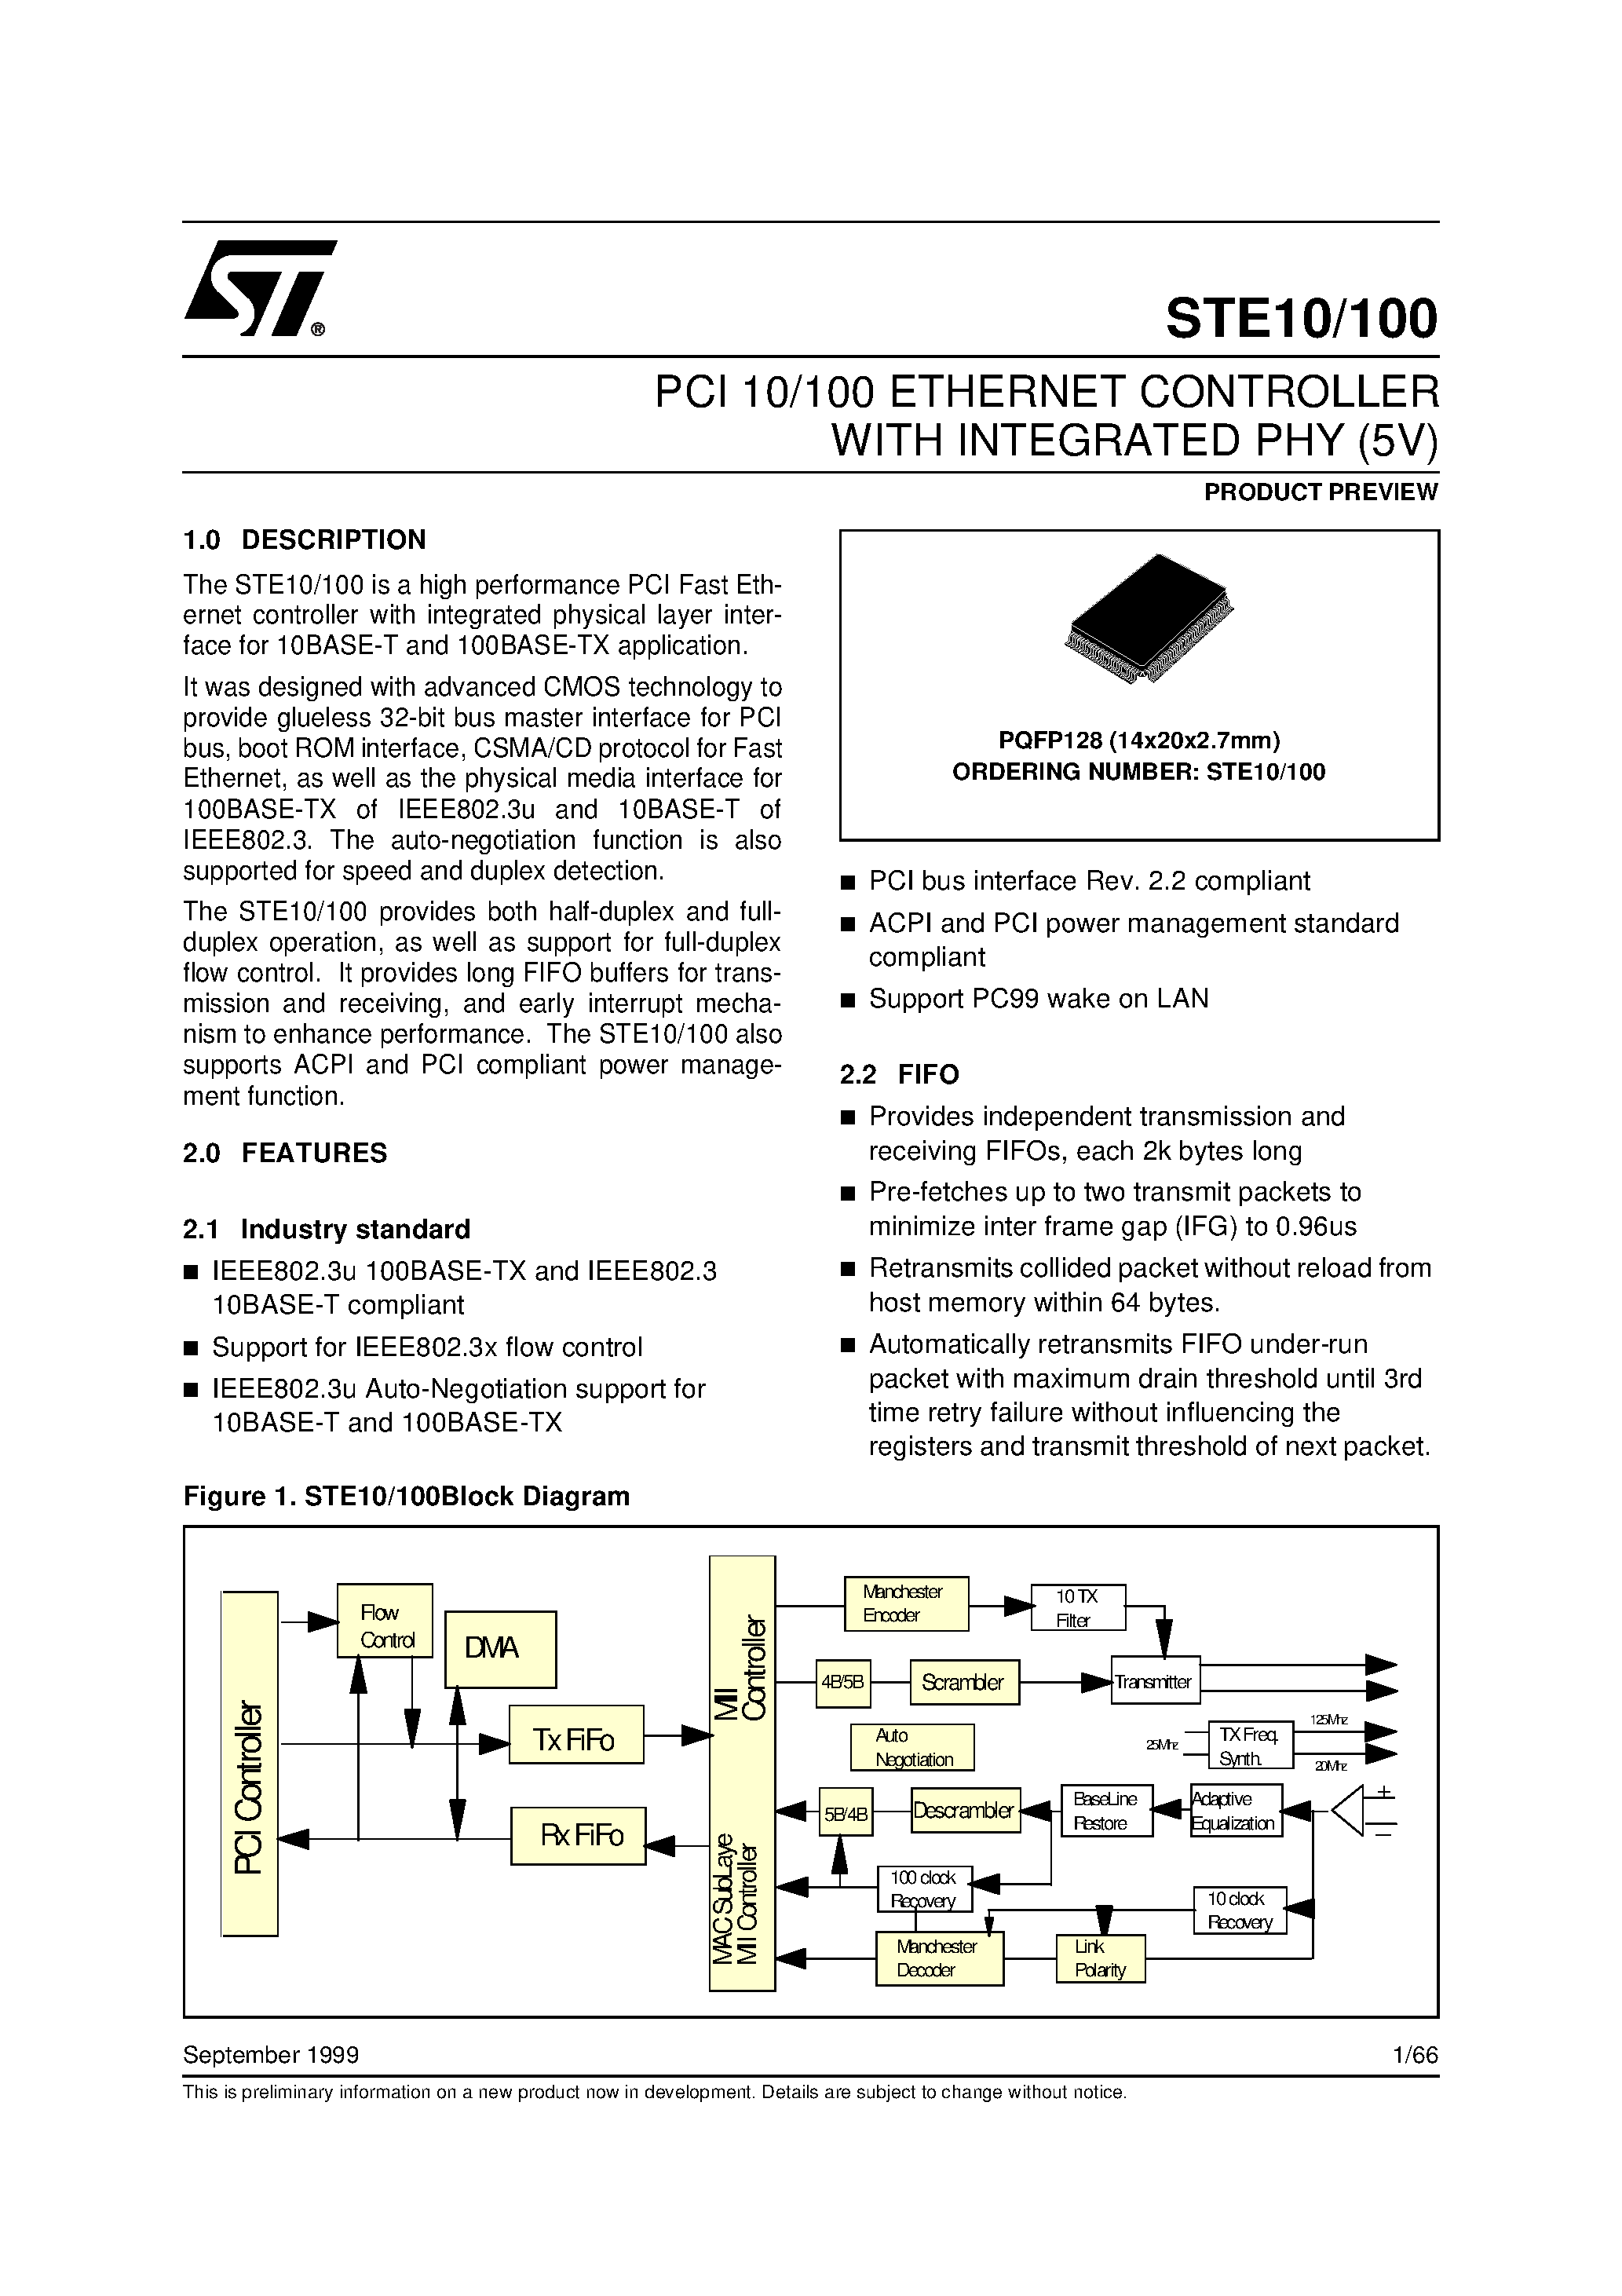 Datasheet STE10/100 - PCI 10/100 ETHERNET CONTROLLER WITH INTEGRATED PHY 5V page 1